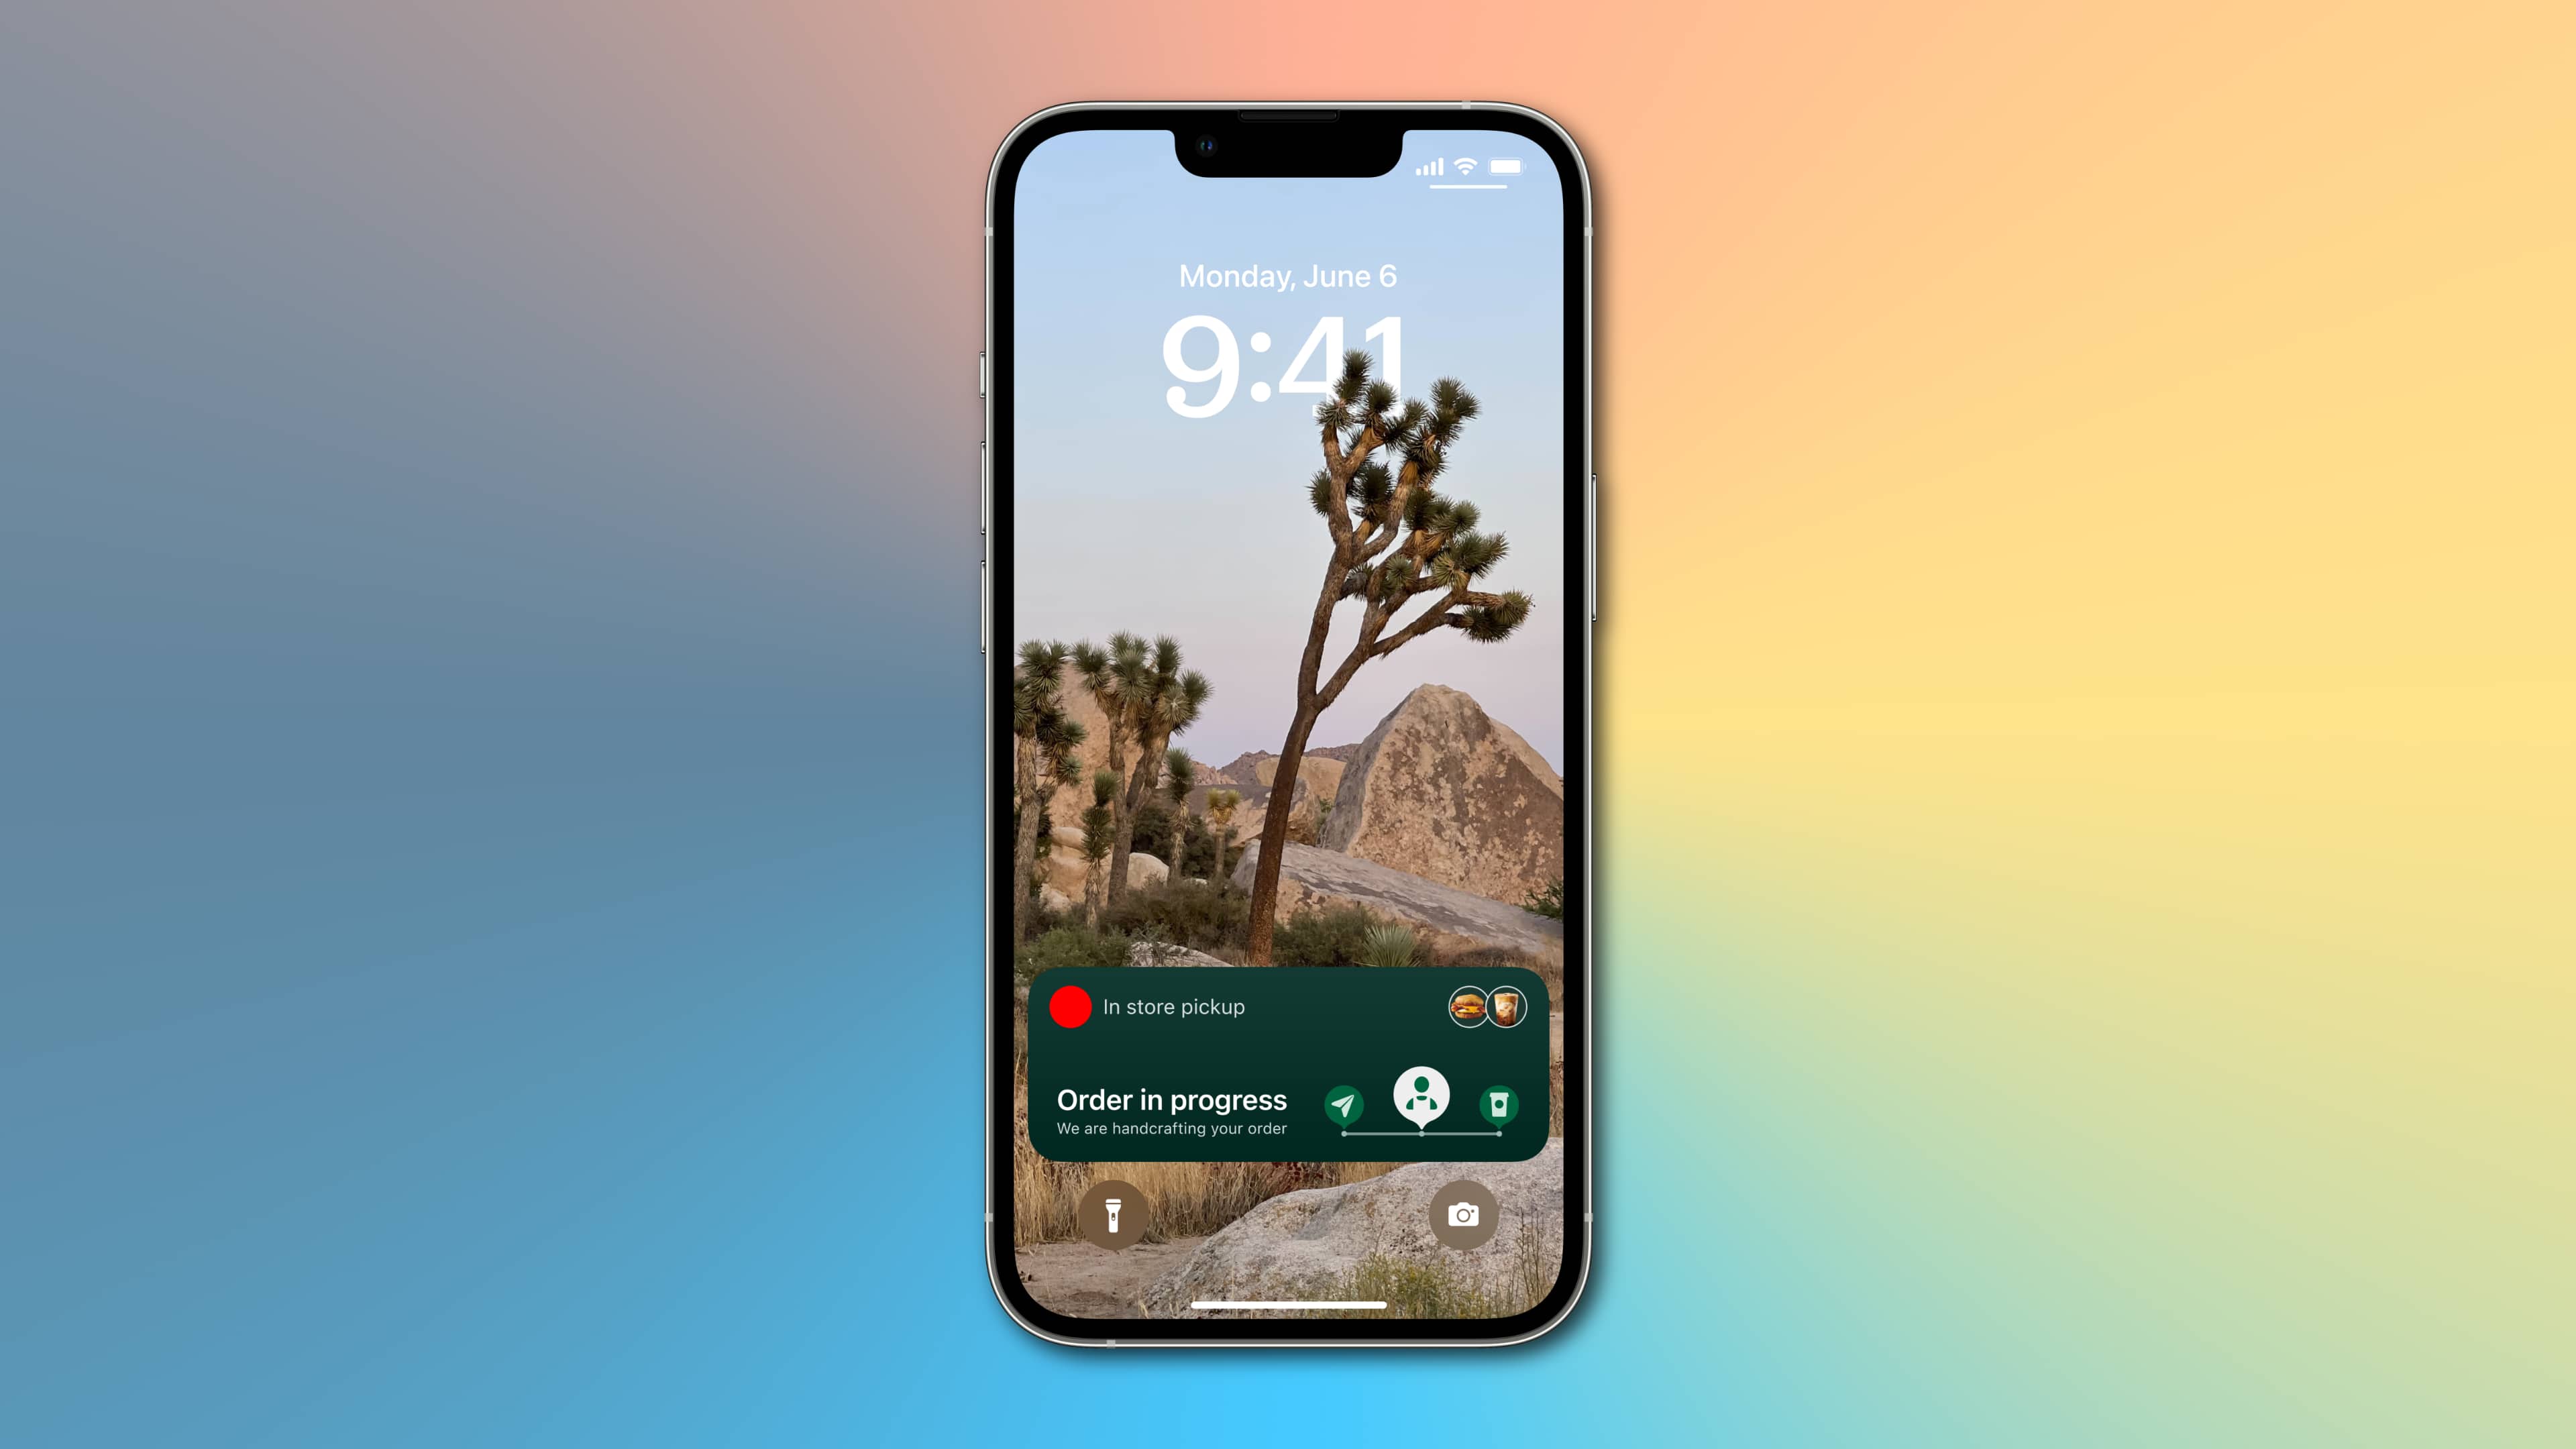 How to receive live activity updates more frequently on the iPhone’s lock screen